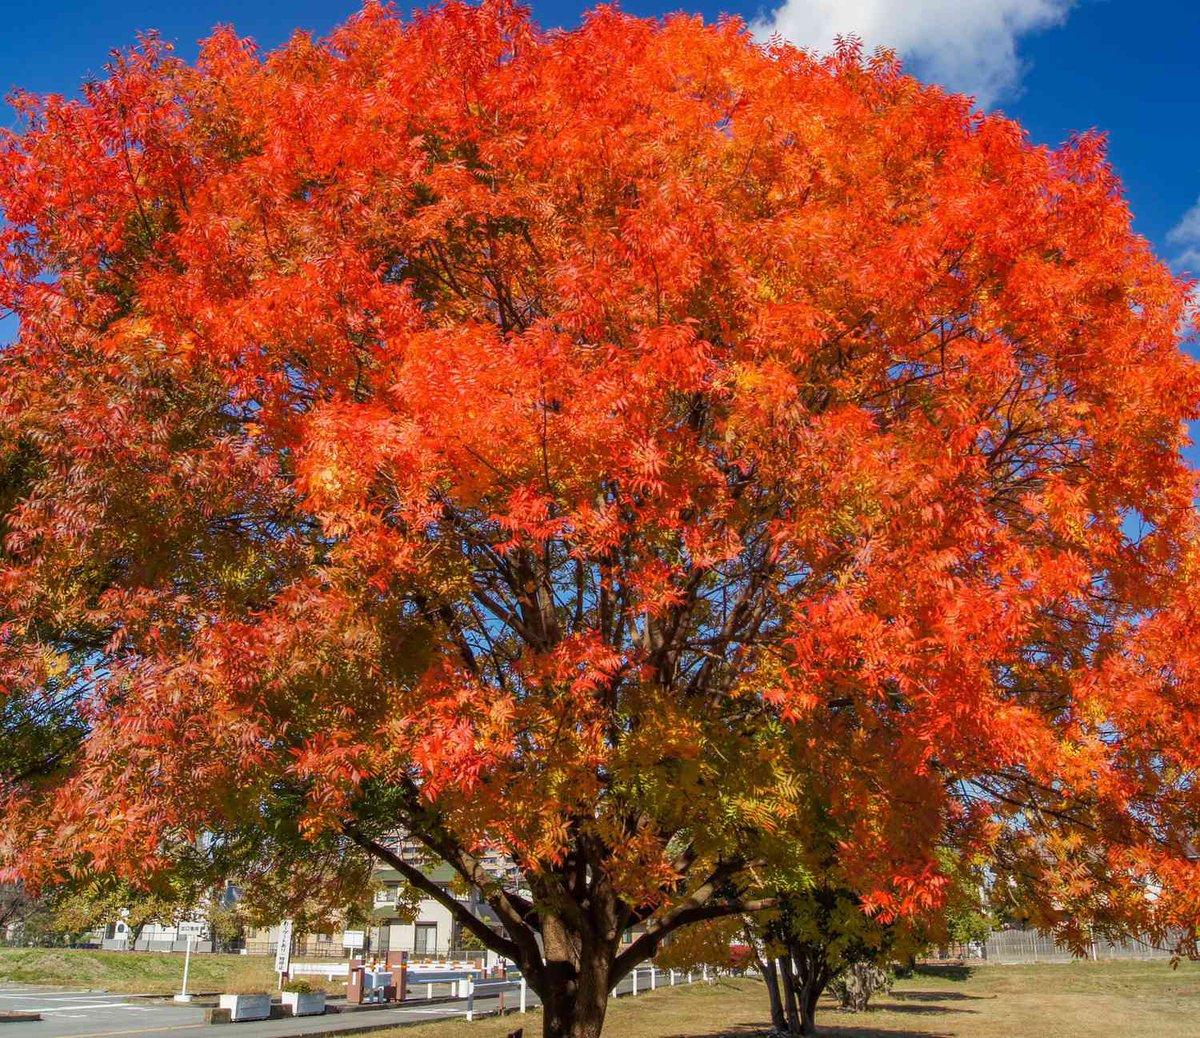 Many cities have a tree program. Our city gave us a beautiful Chinese pistache we have named Ignis because it looks like a ball of flame in the fall. They need regular care the first few years, but once established are easy to maintain. [Different tree pictured. Same variety.]